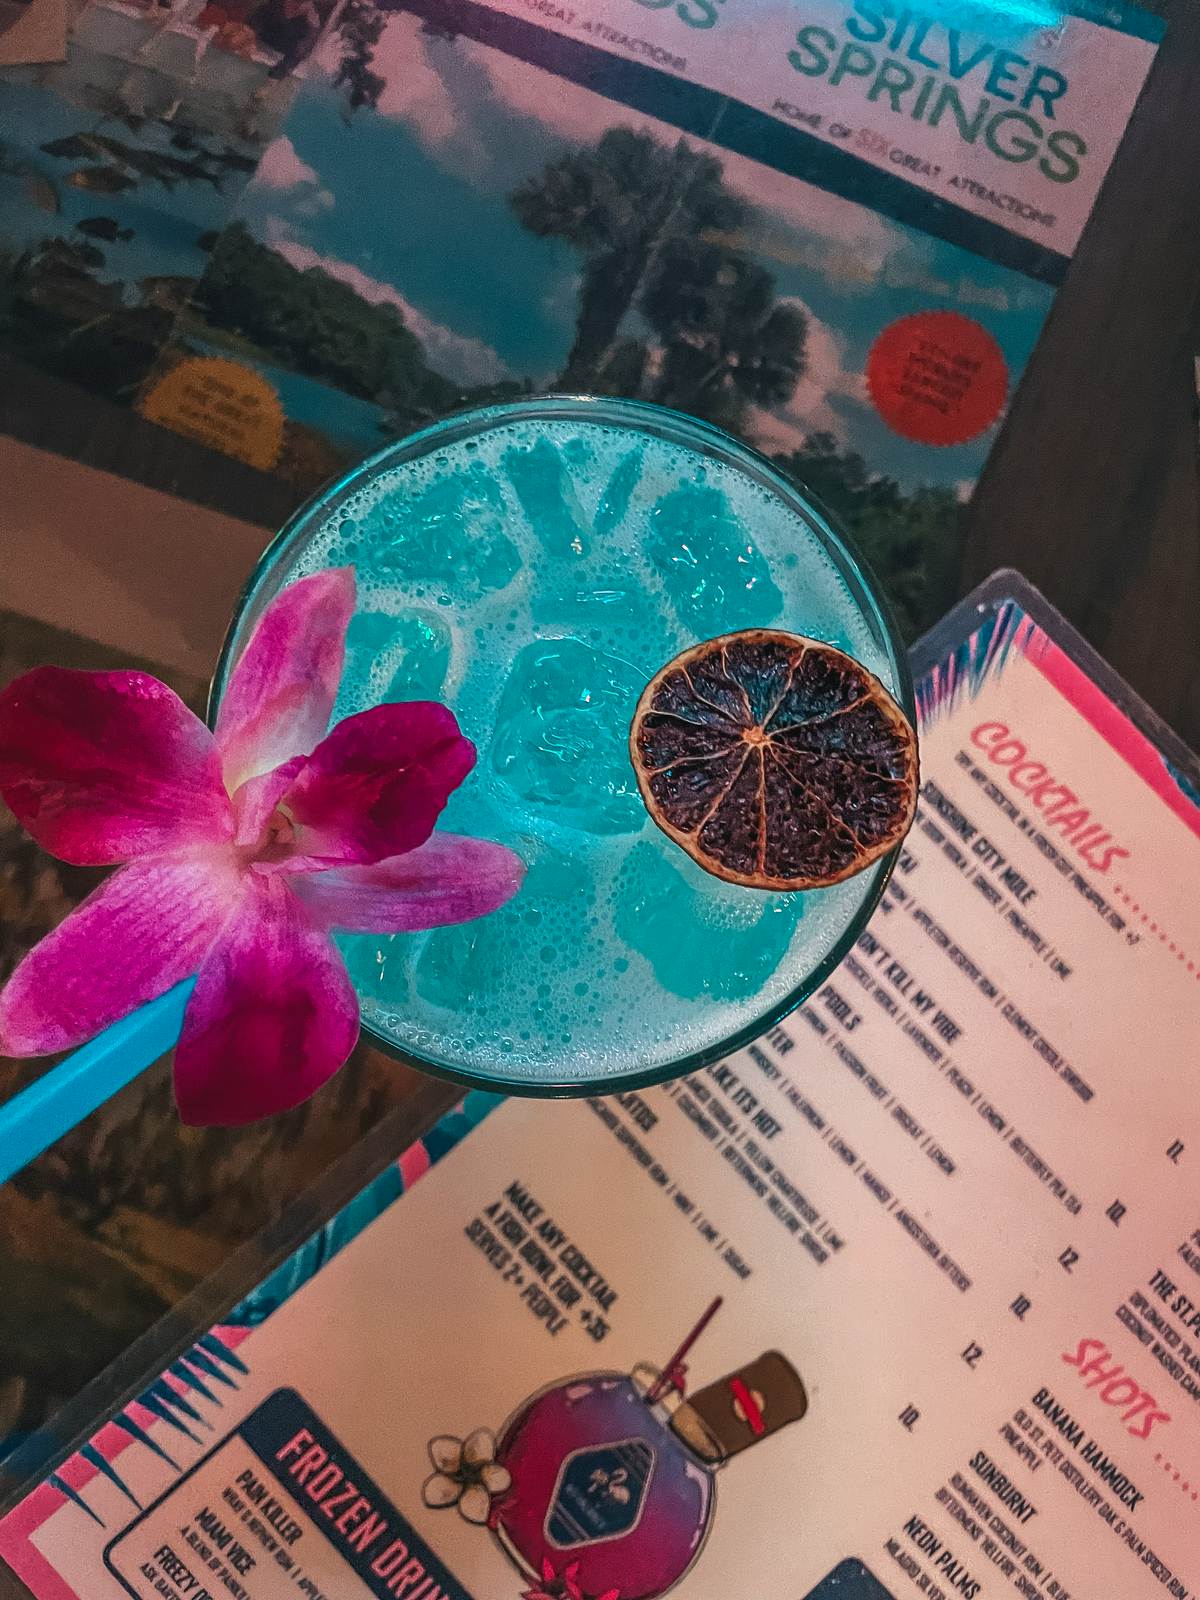 Fun blue cocktail from No Vacancy bar